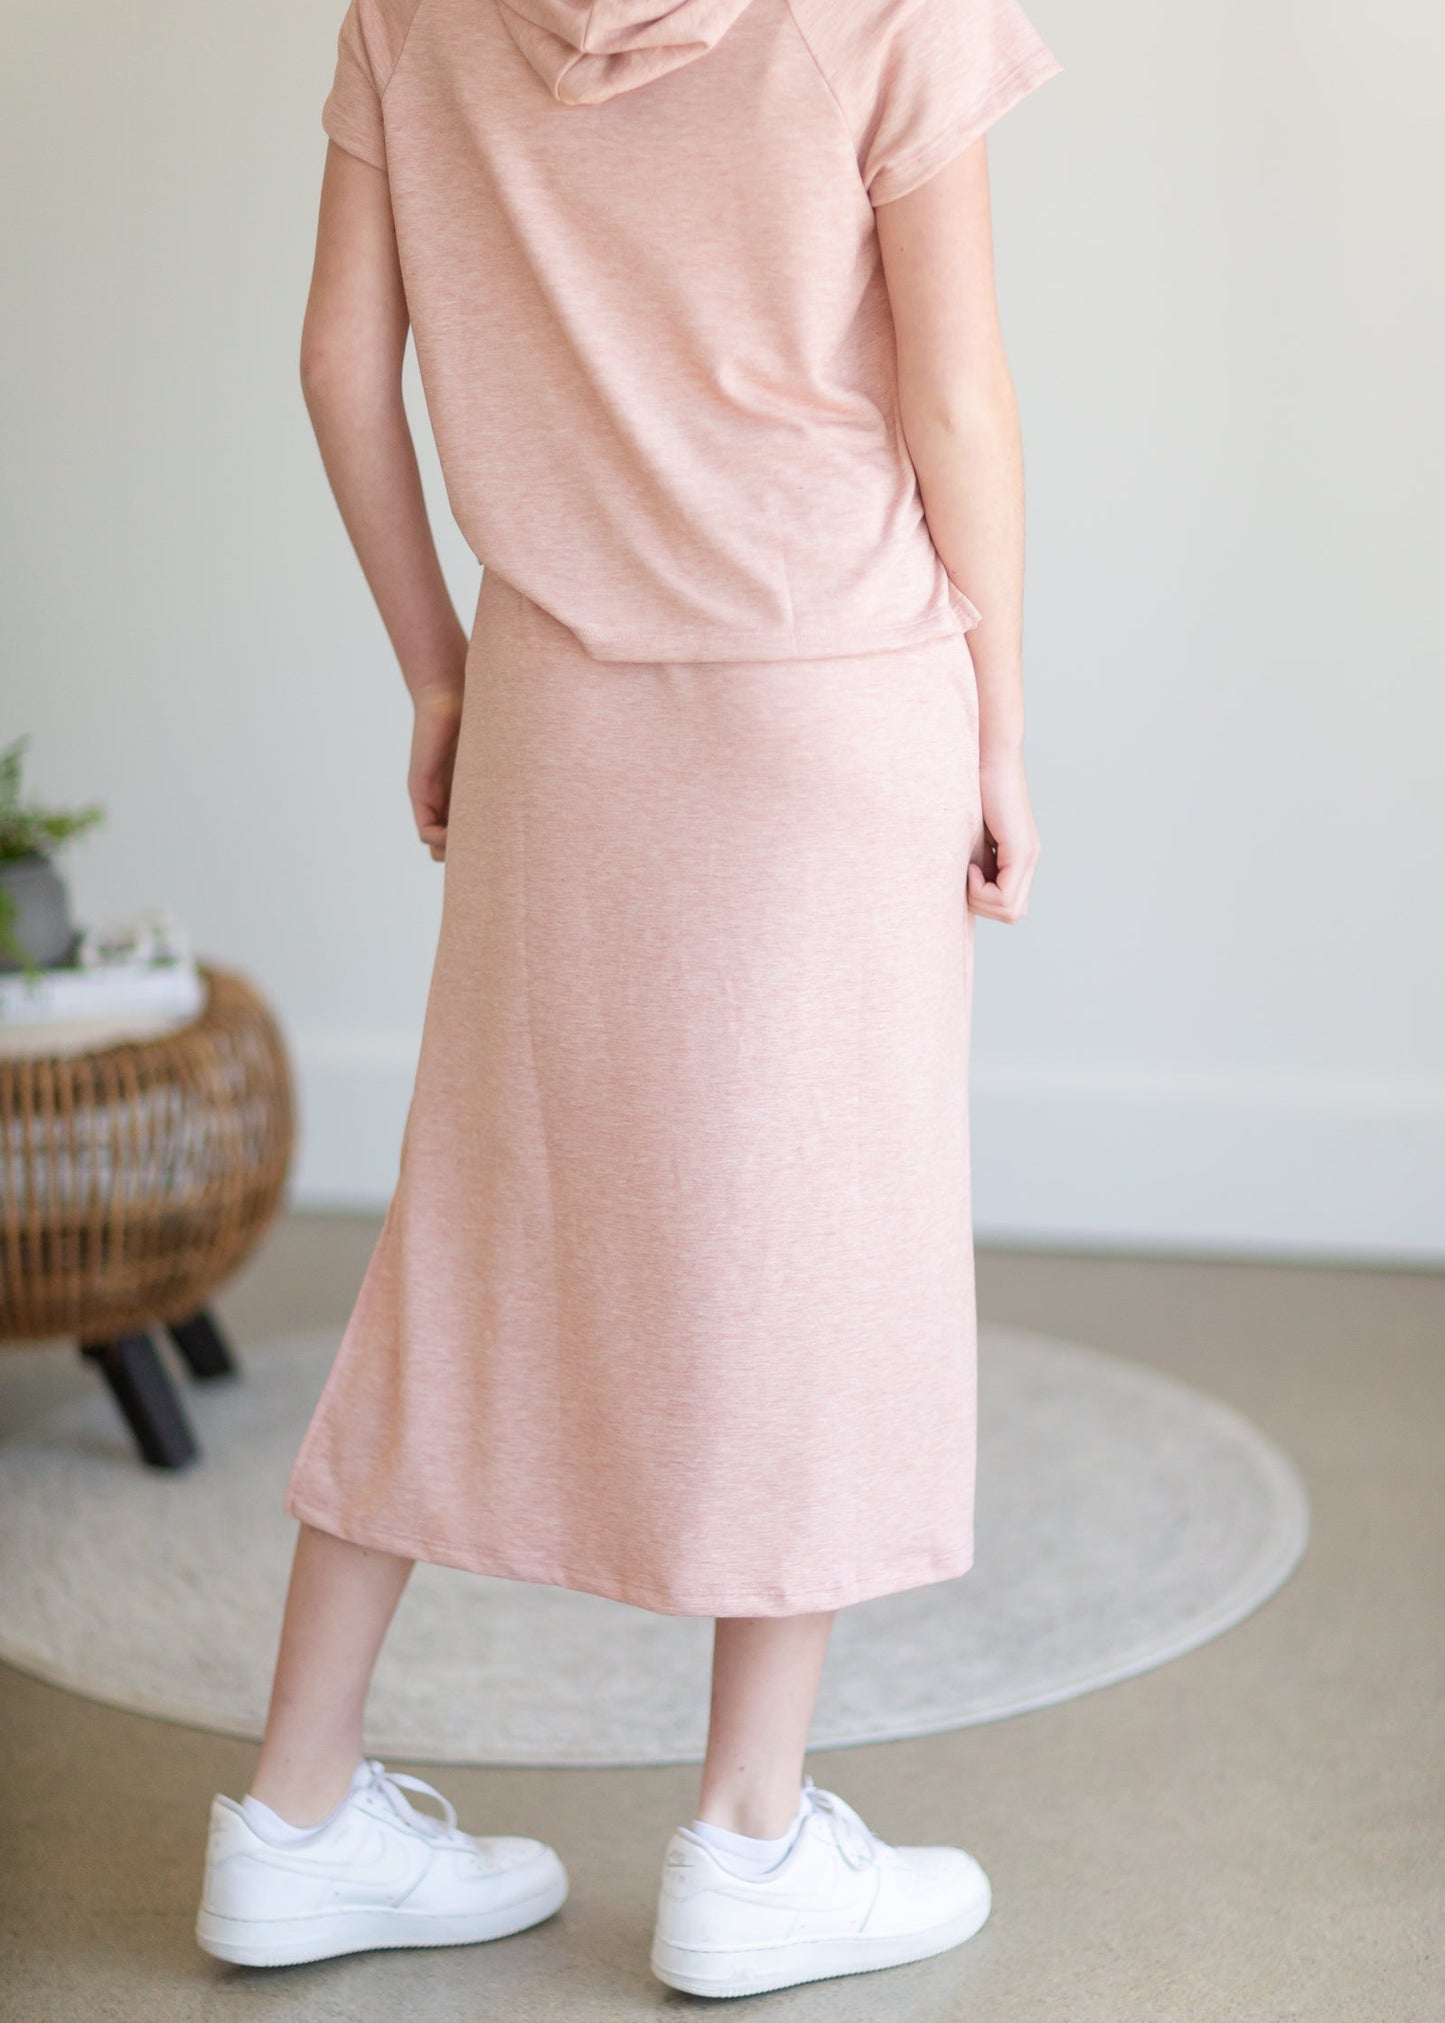 Rose French Terry Knit Skirt - FINAL SALE Skirts